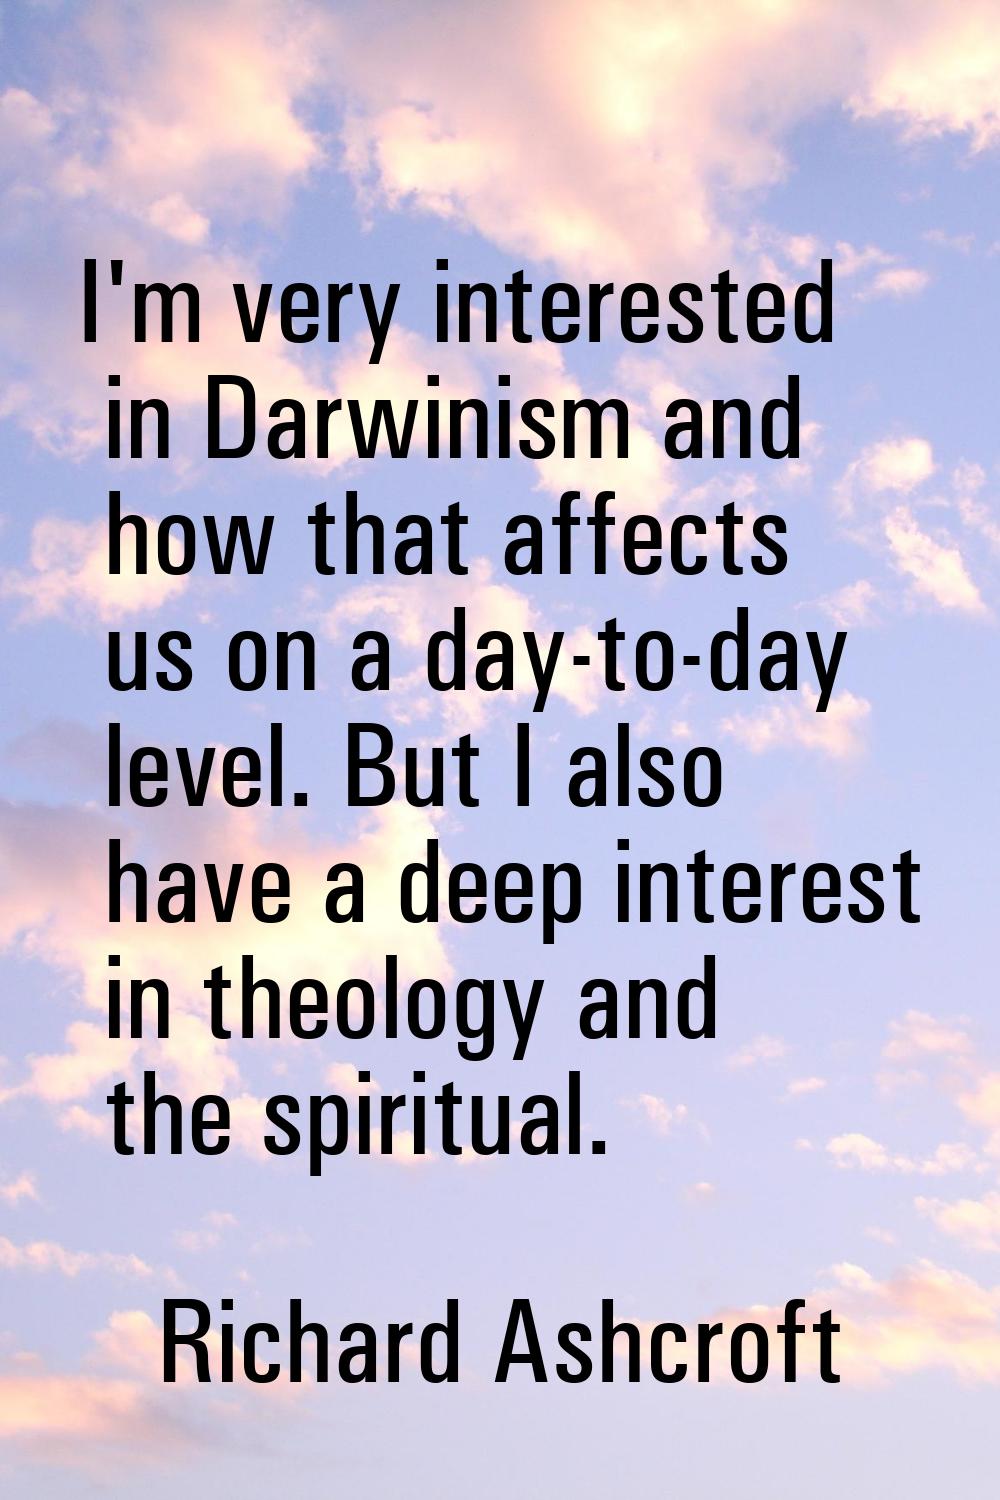 I'm very interested in Darwinism and how that affects us on a day-to-day level. But I also have a d